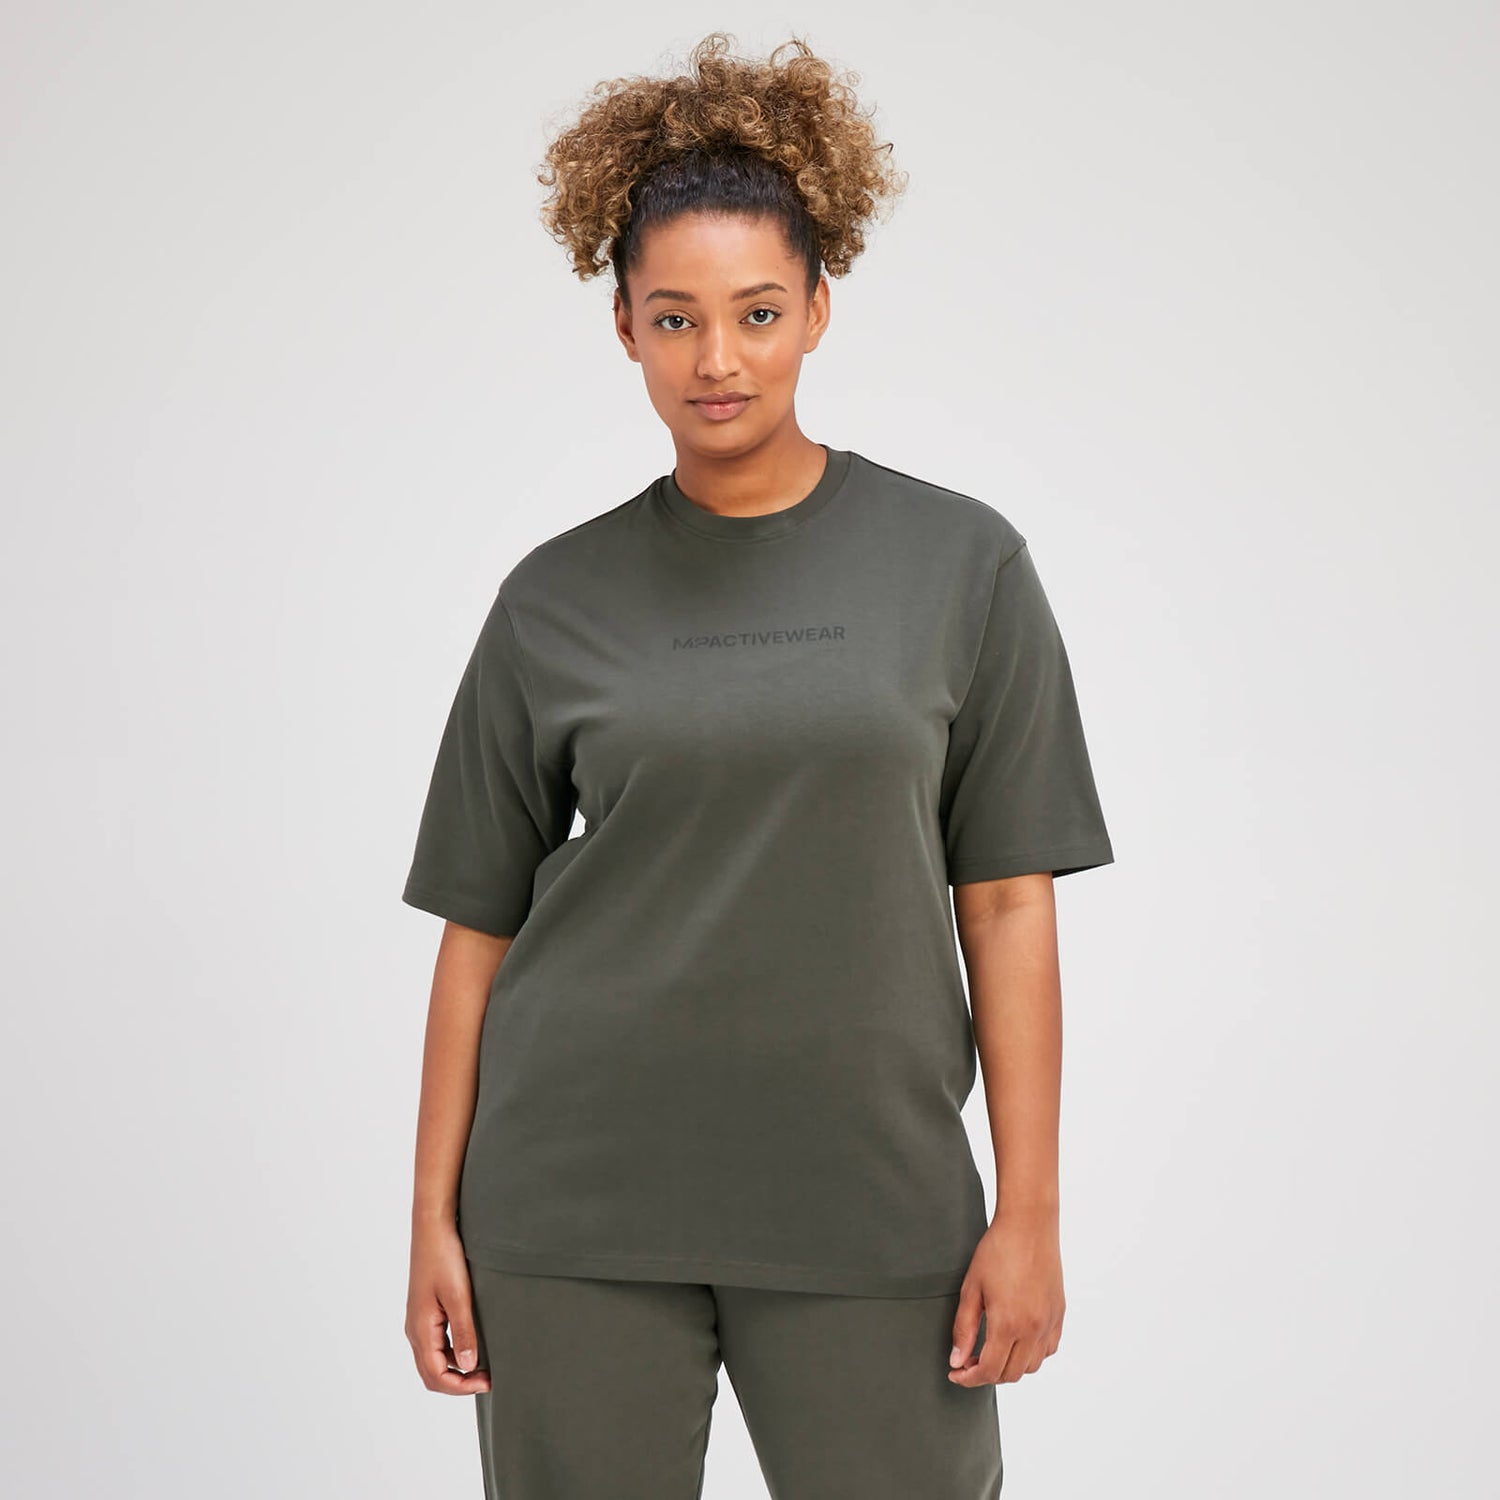 MP Rest Day oversized T-shirt voor dames - Taupe-groen - XS